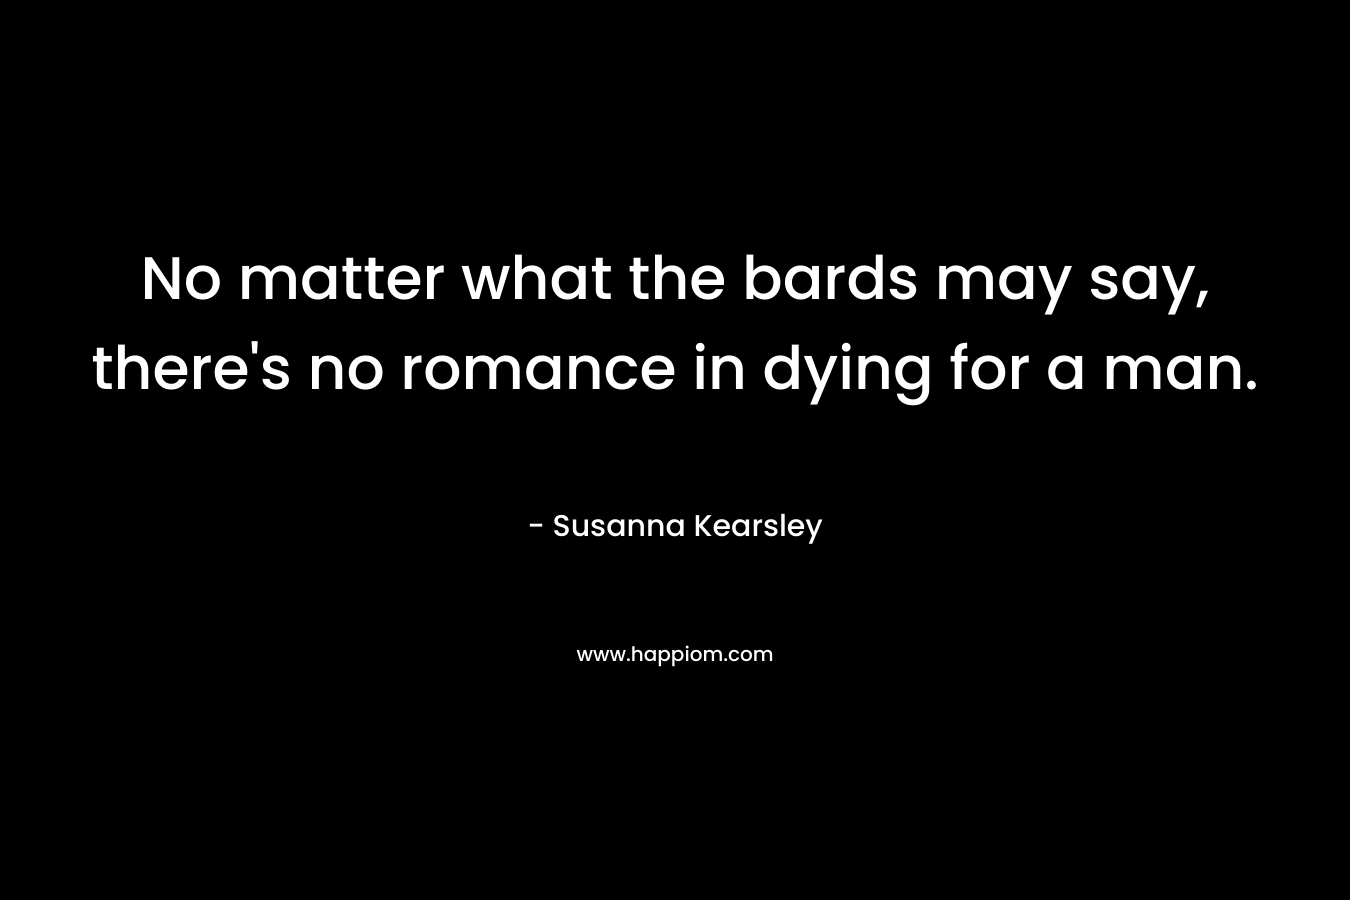 No matter what the bards may say, there’s no romance in dying for a man. – Susanna Kearsley